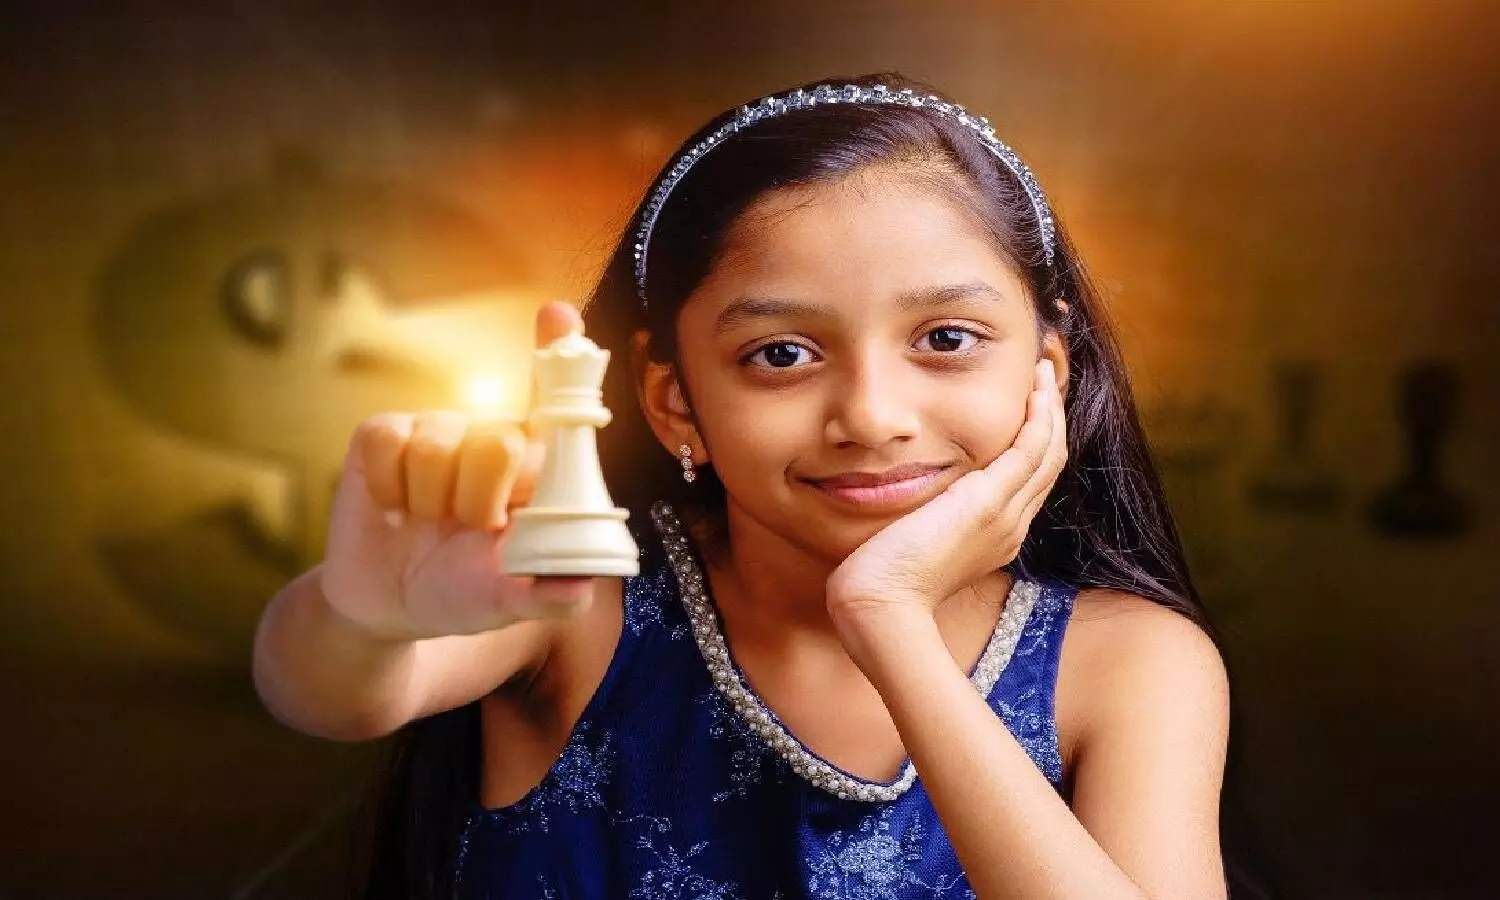 Checkmate: Meet Alana from Vizag, World Number 2 in Under-10 girls chess